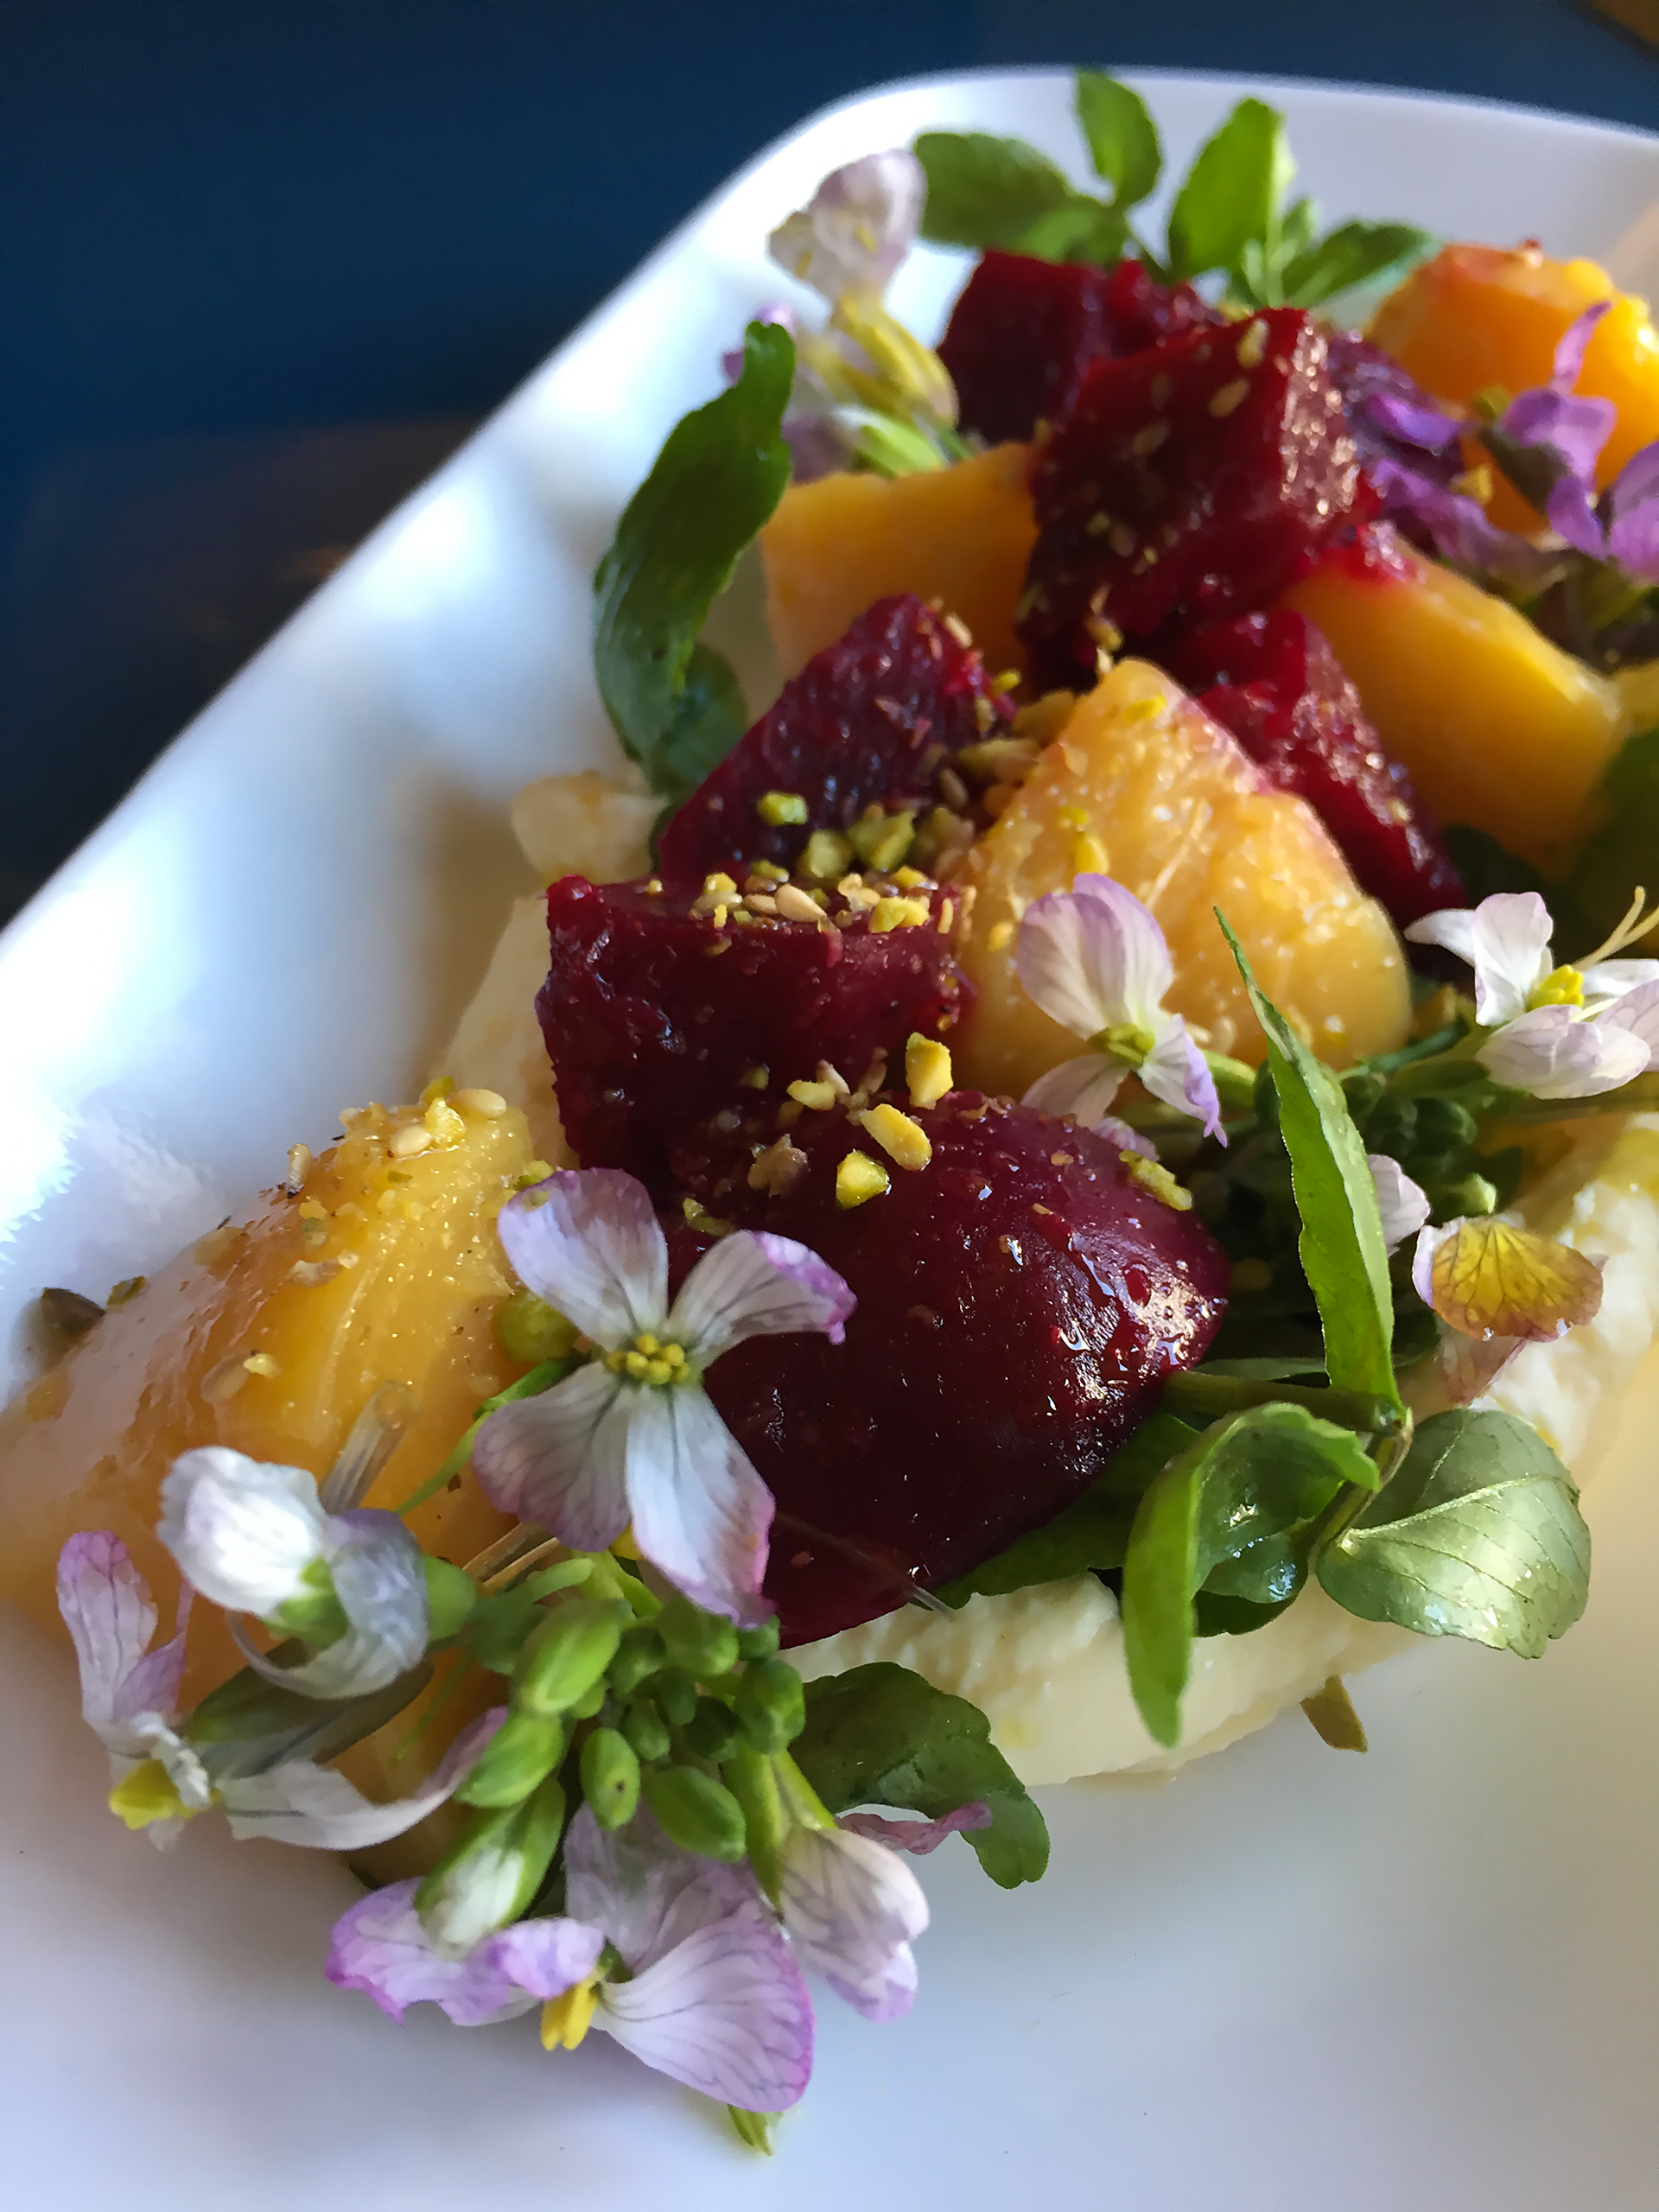 Roasted Beets with Pistachio Dukkha and Bellwether Farms Ricotta